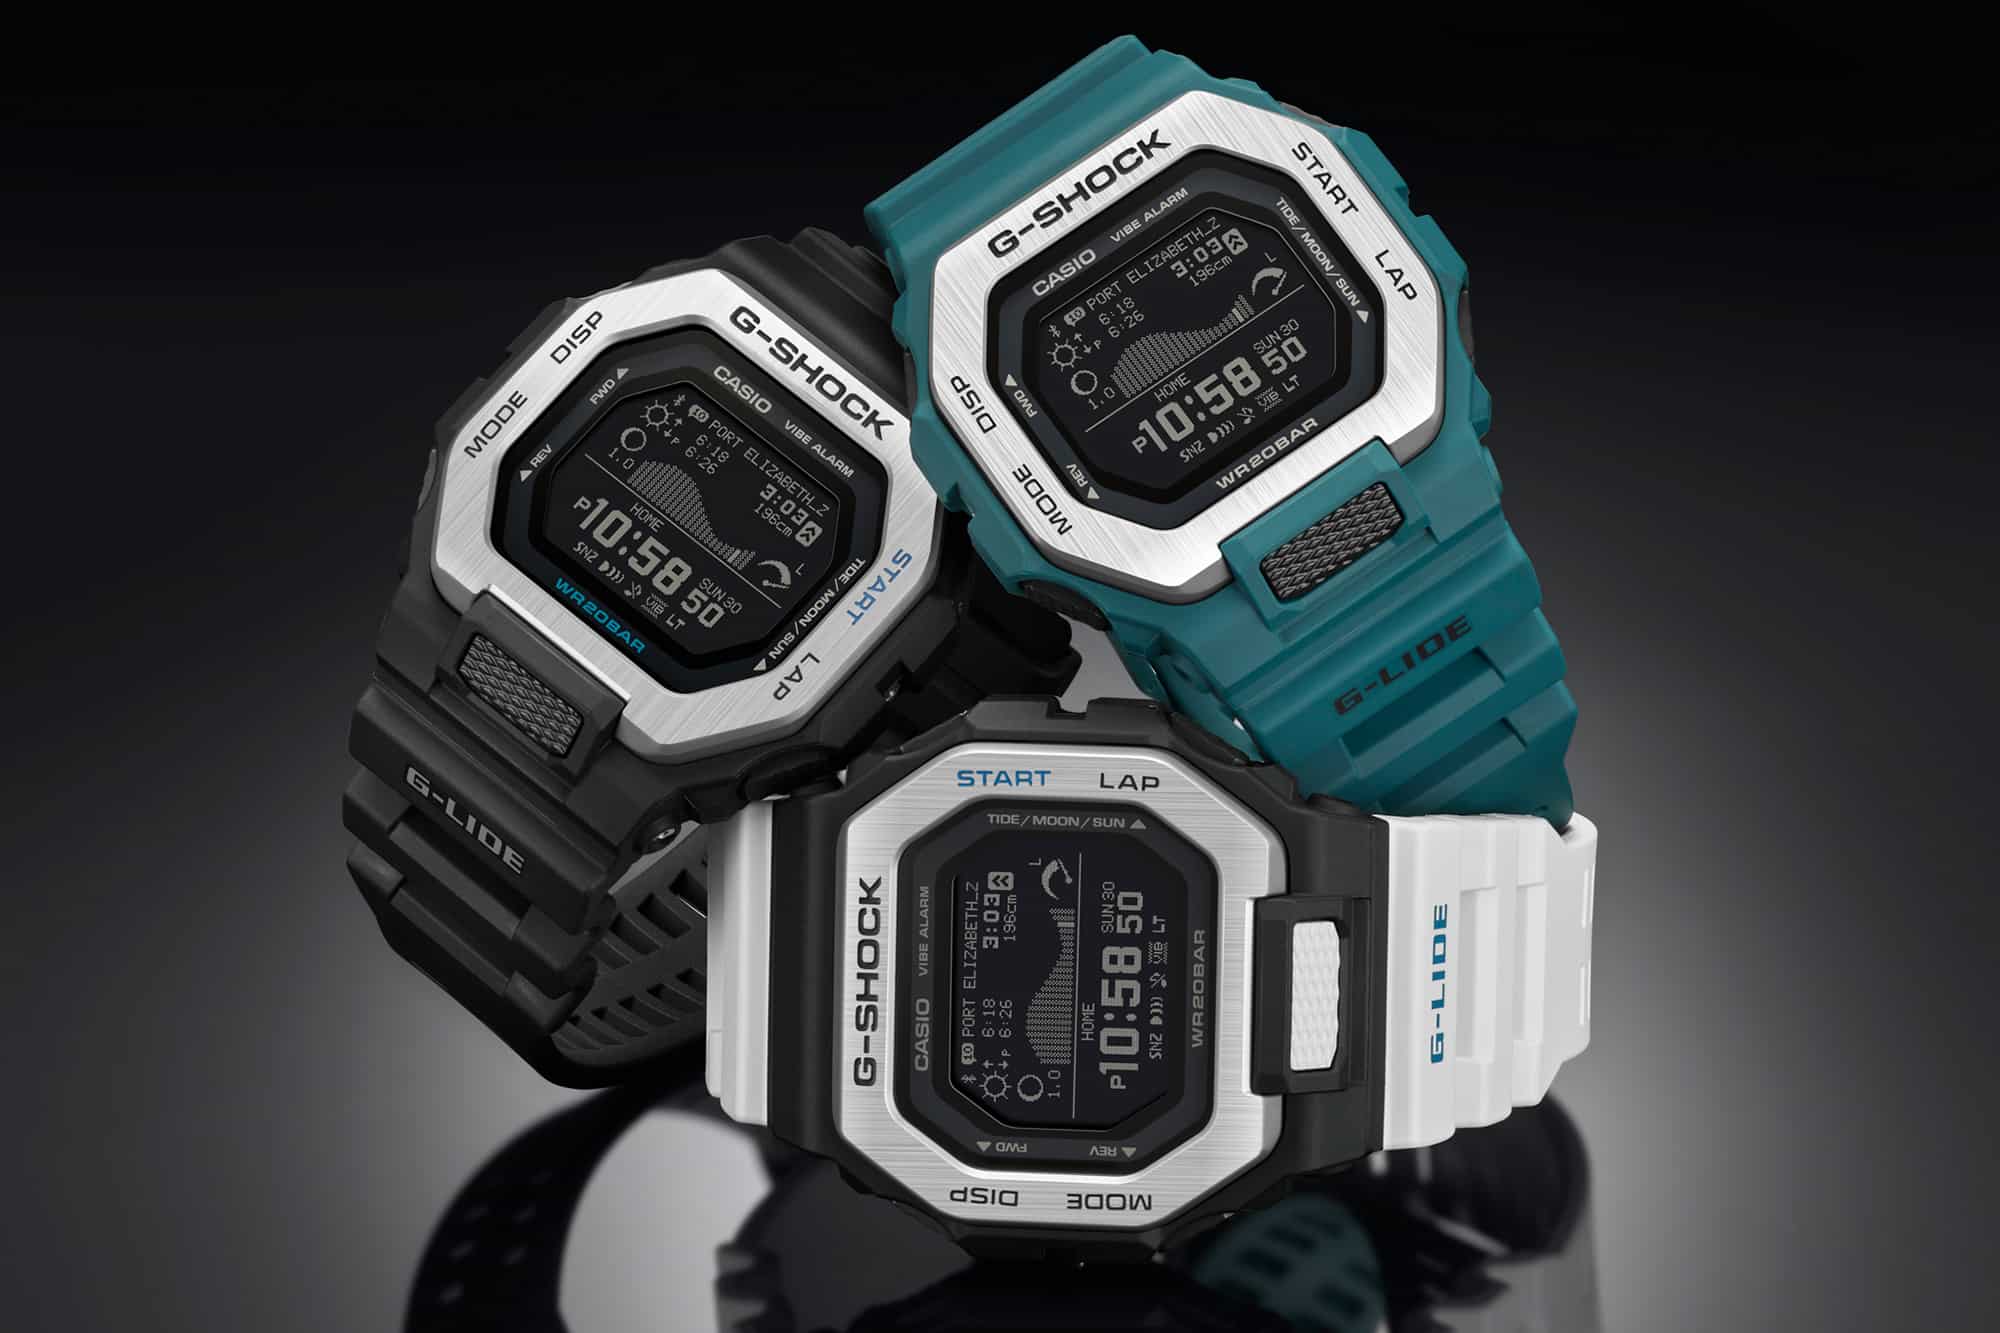 G-Shock Unveils New Watches Aimed at Surfers at a Low Price with App Integration